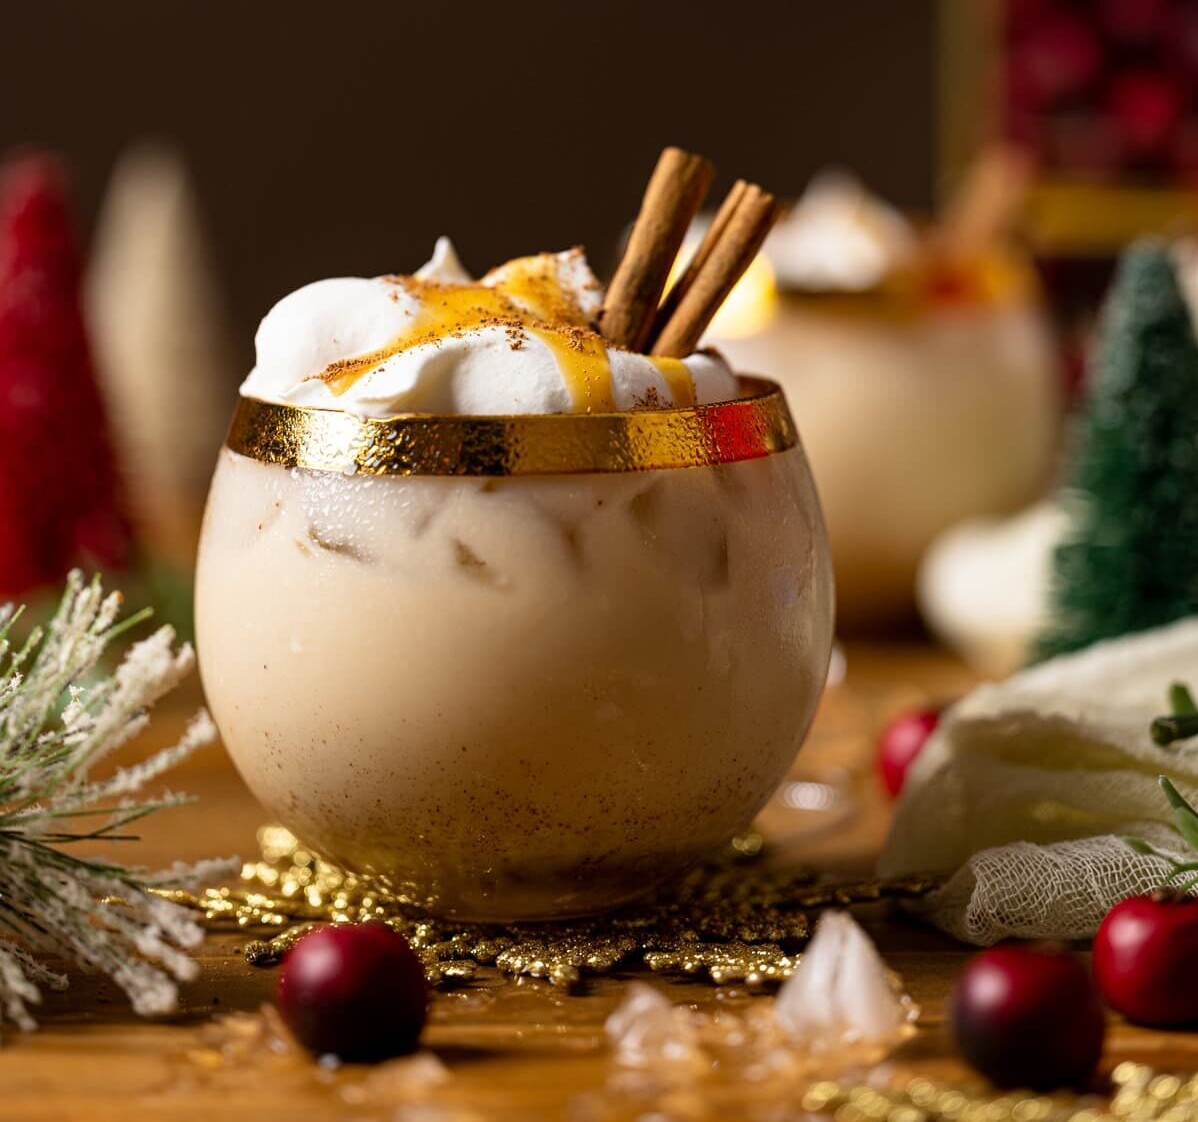 Vegan Caramel Eggnog Mocktail topped with coconut whipped cream, cinnamon sticks, and caramel sauce in a gold-rimmed glass